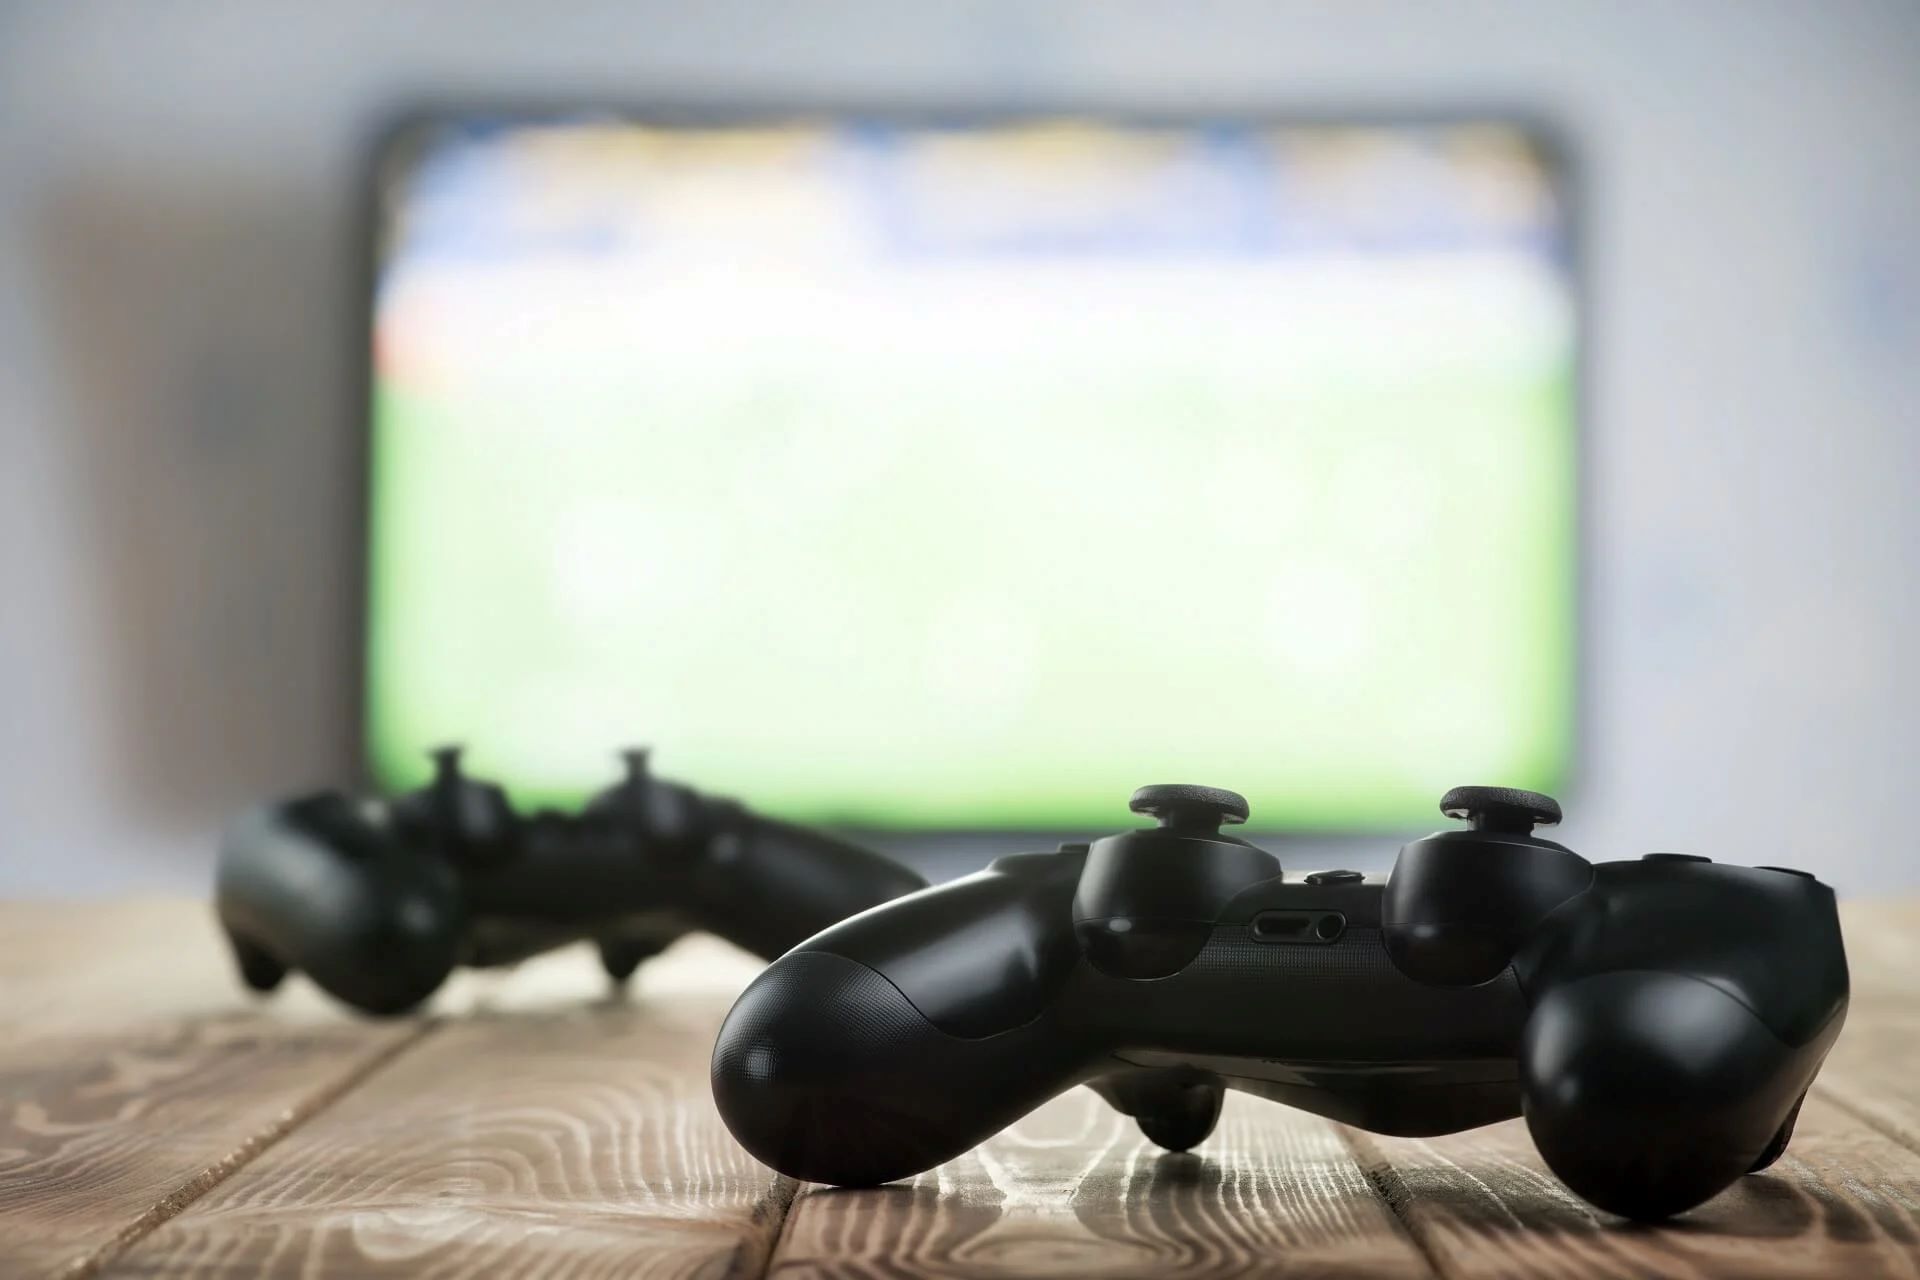 In Windows 10, How To Keep My Game Controller In Order